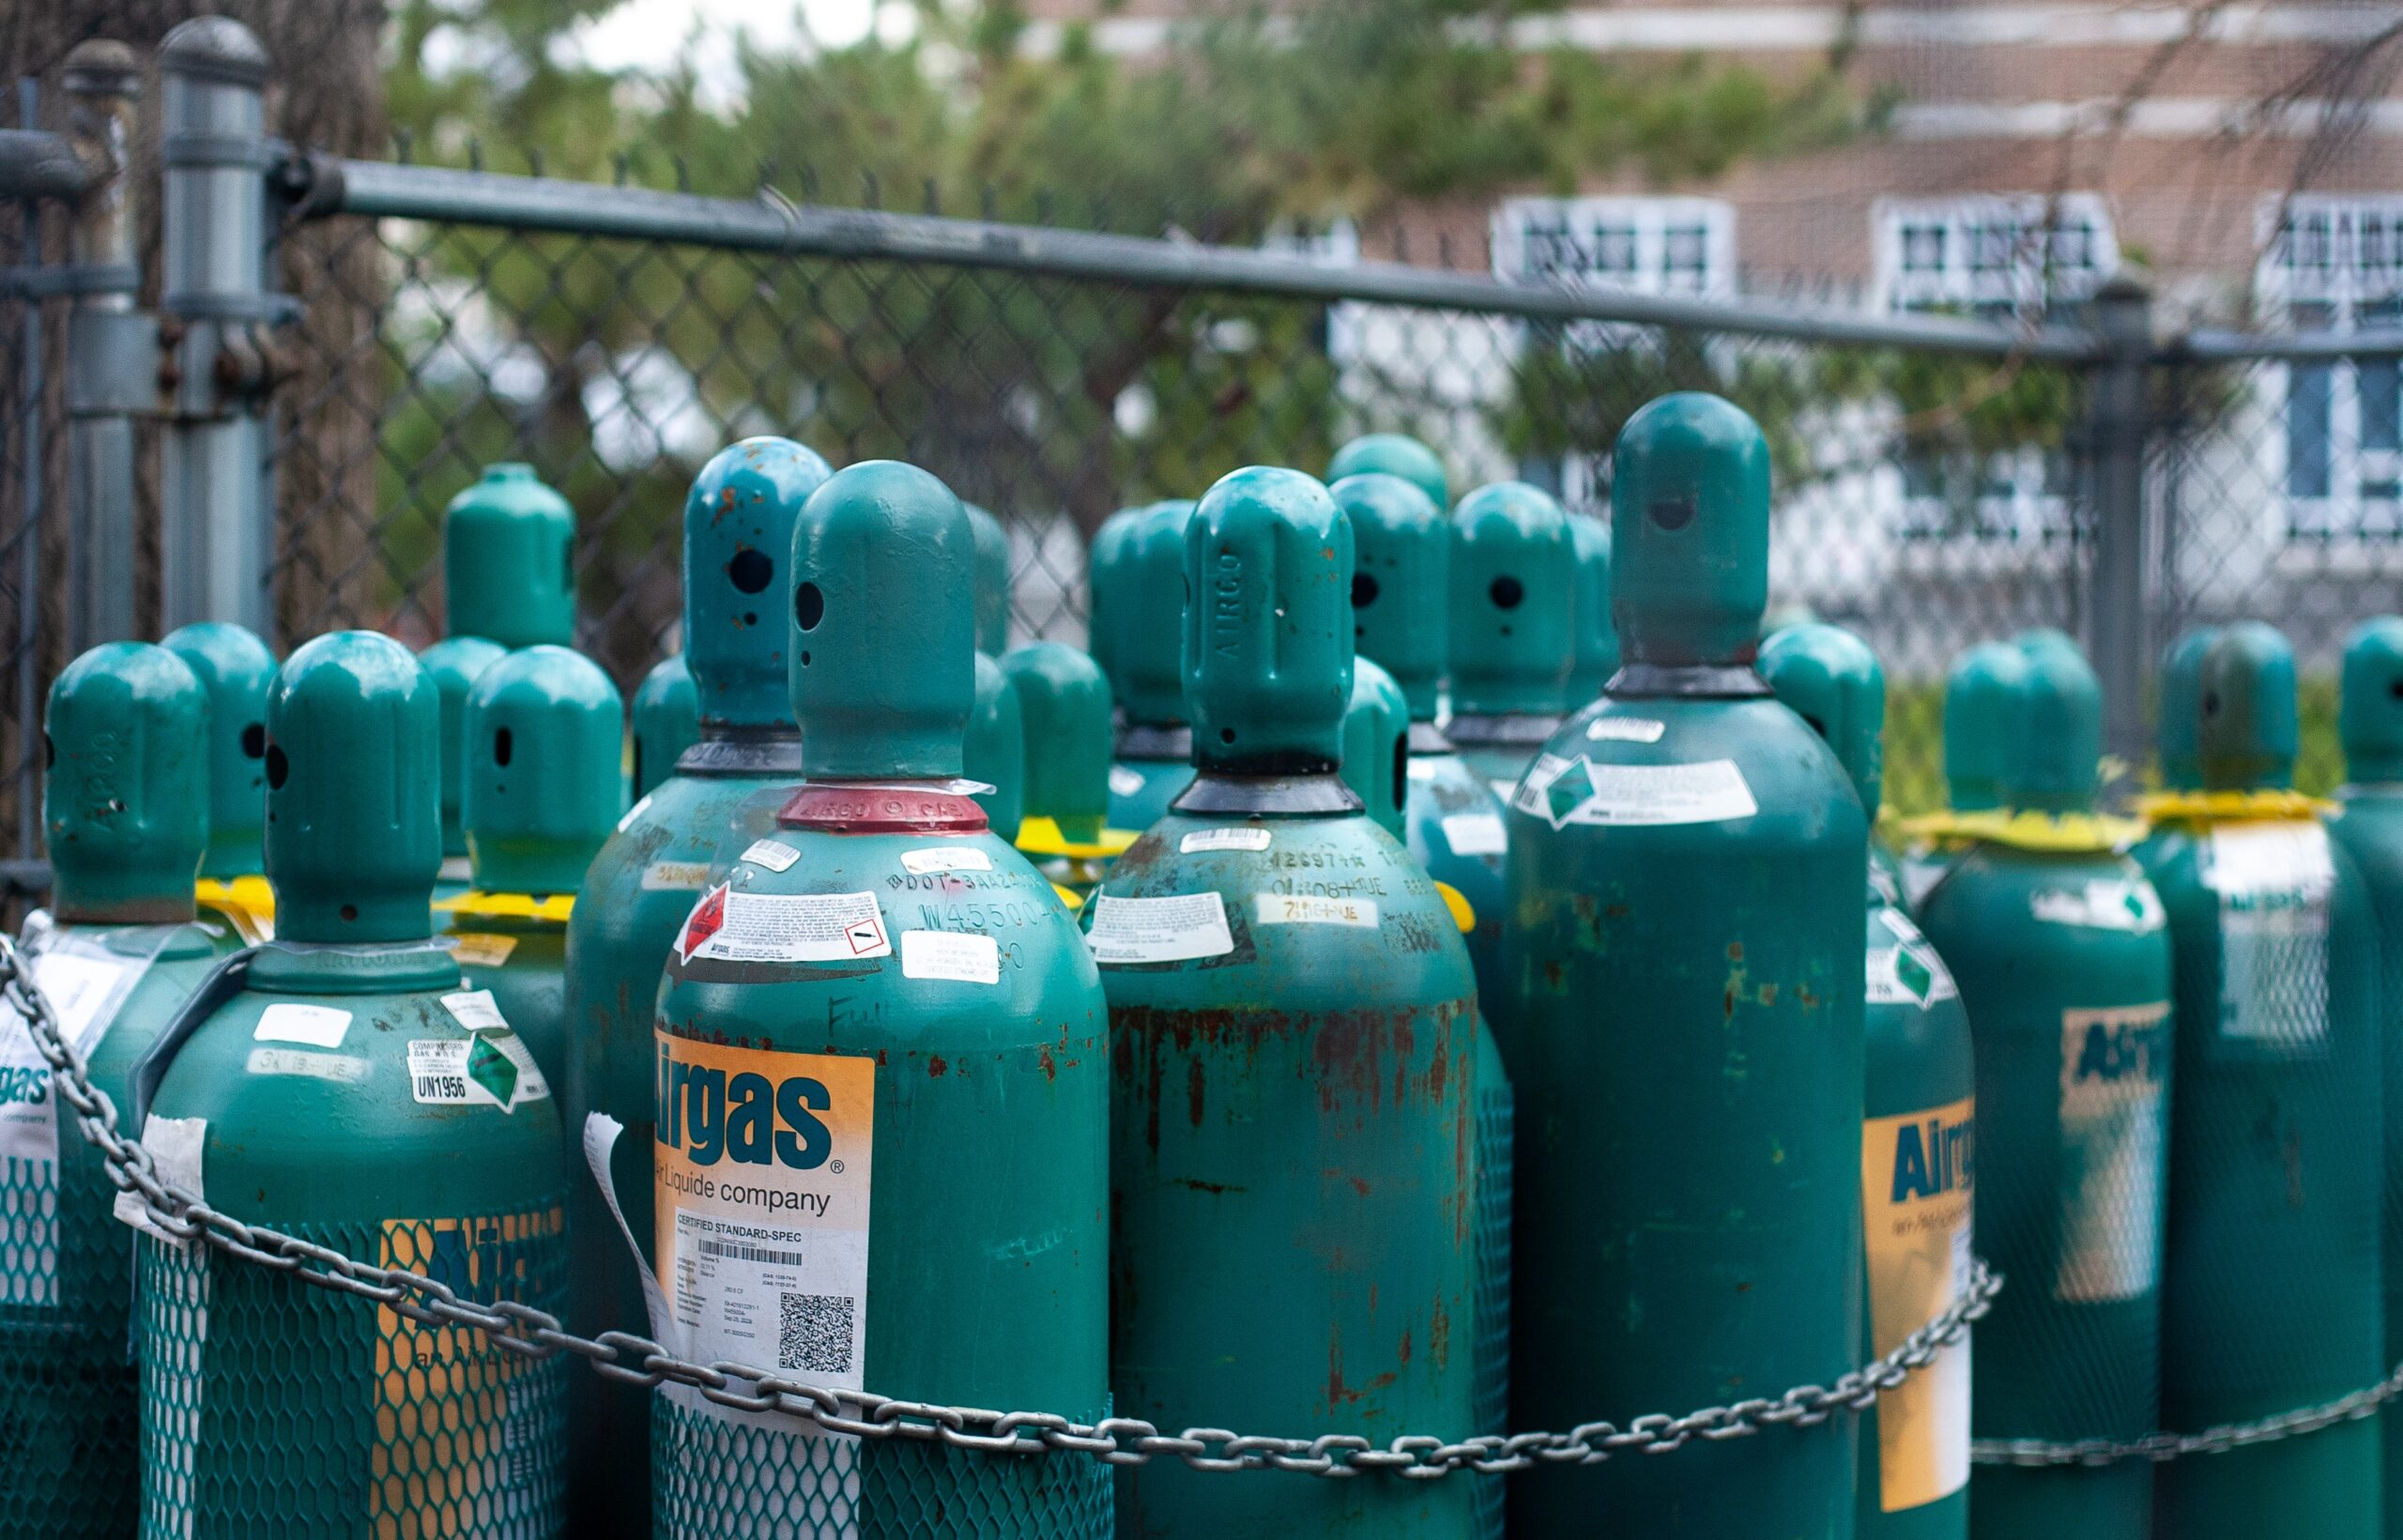 How To Dispose of Small Propane Tanks (7 Ways To Keep It Safe and Legal)